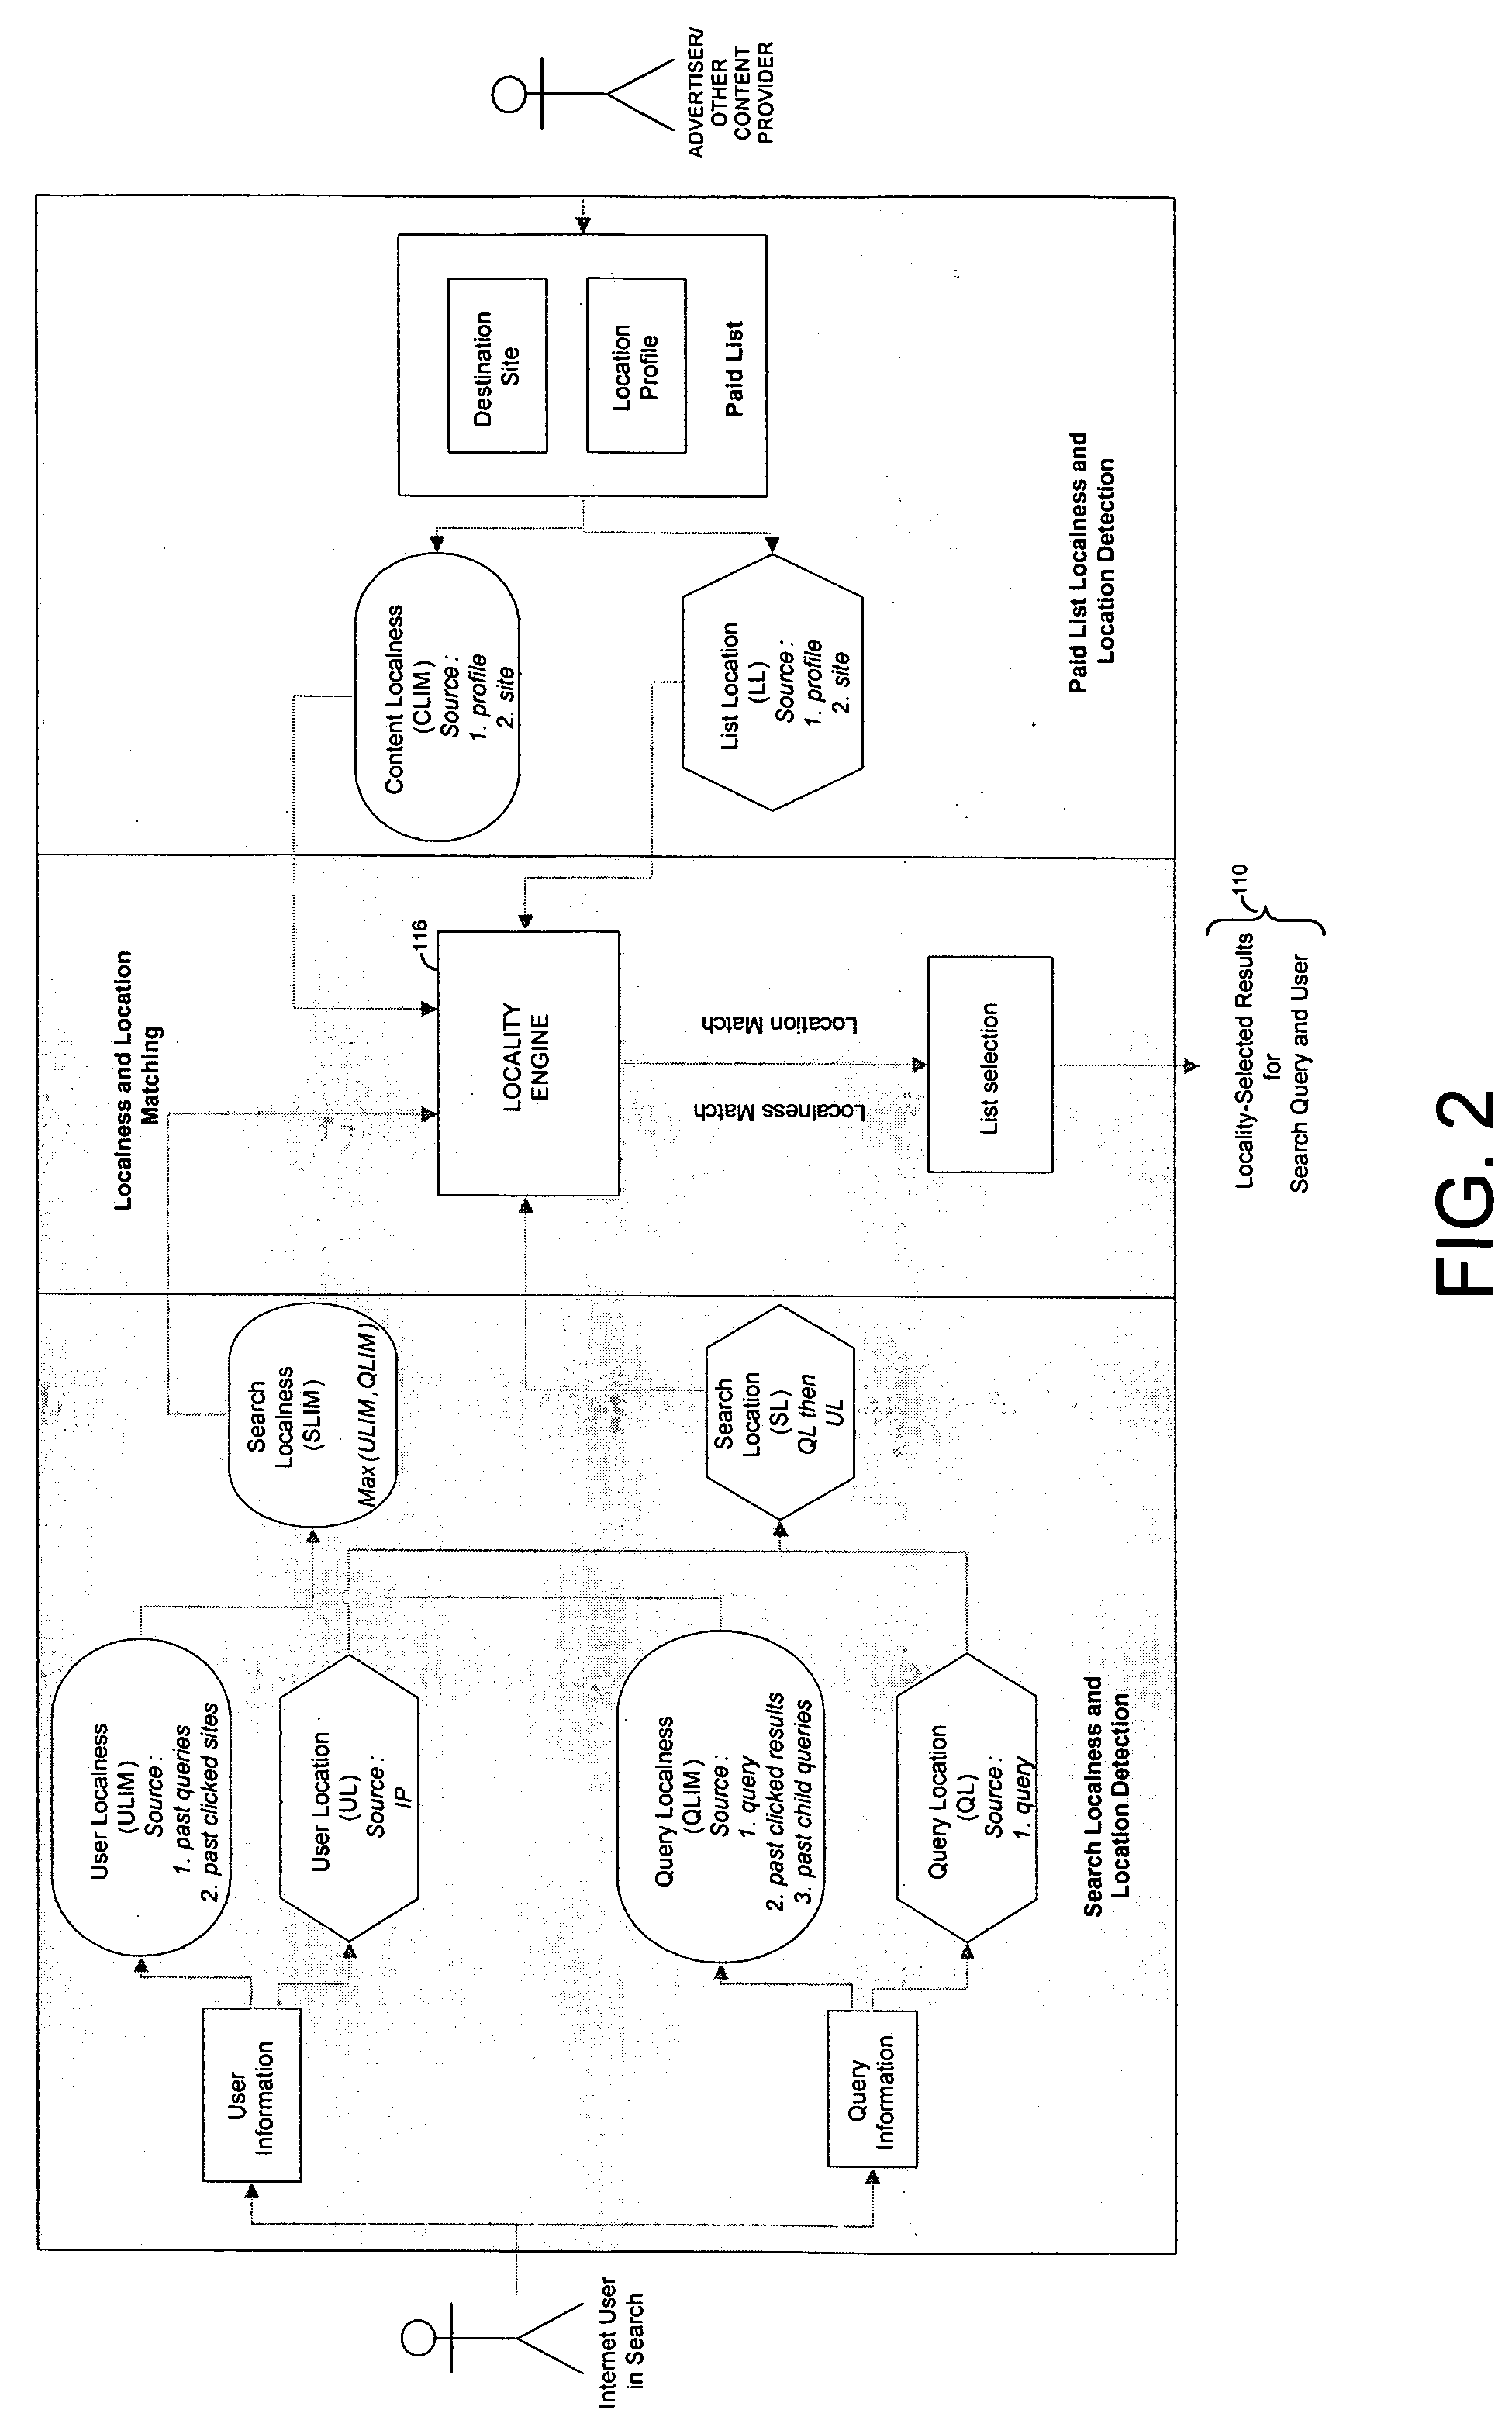 System and method for automatic generation of search results based on local intention